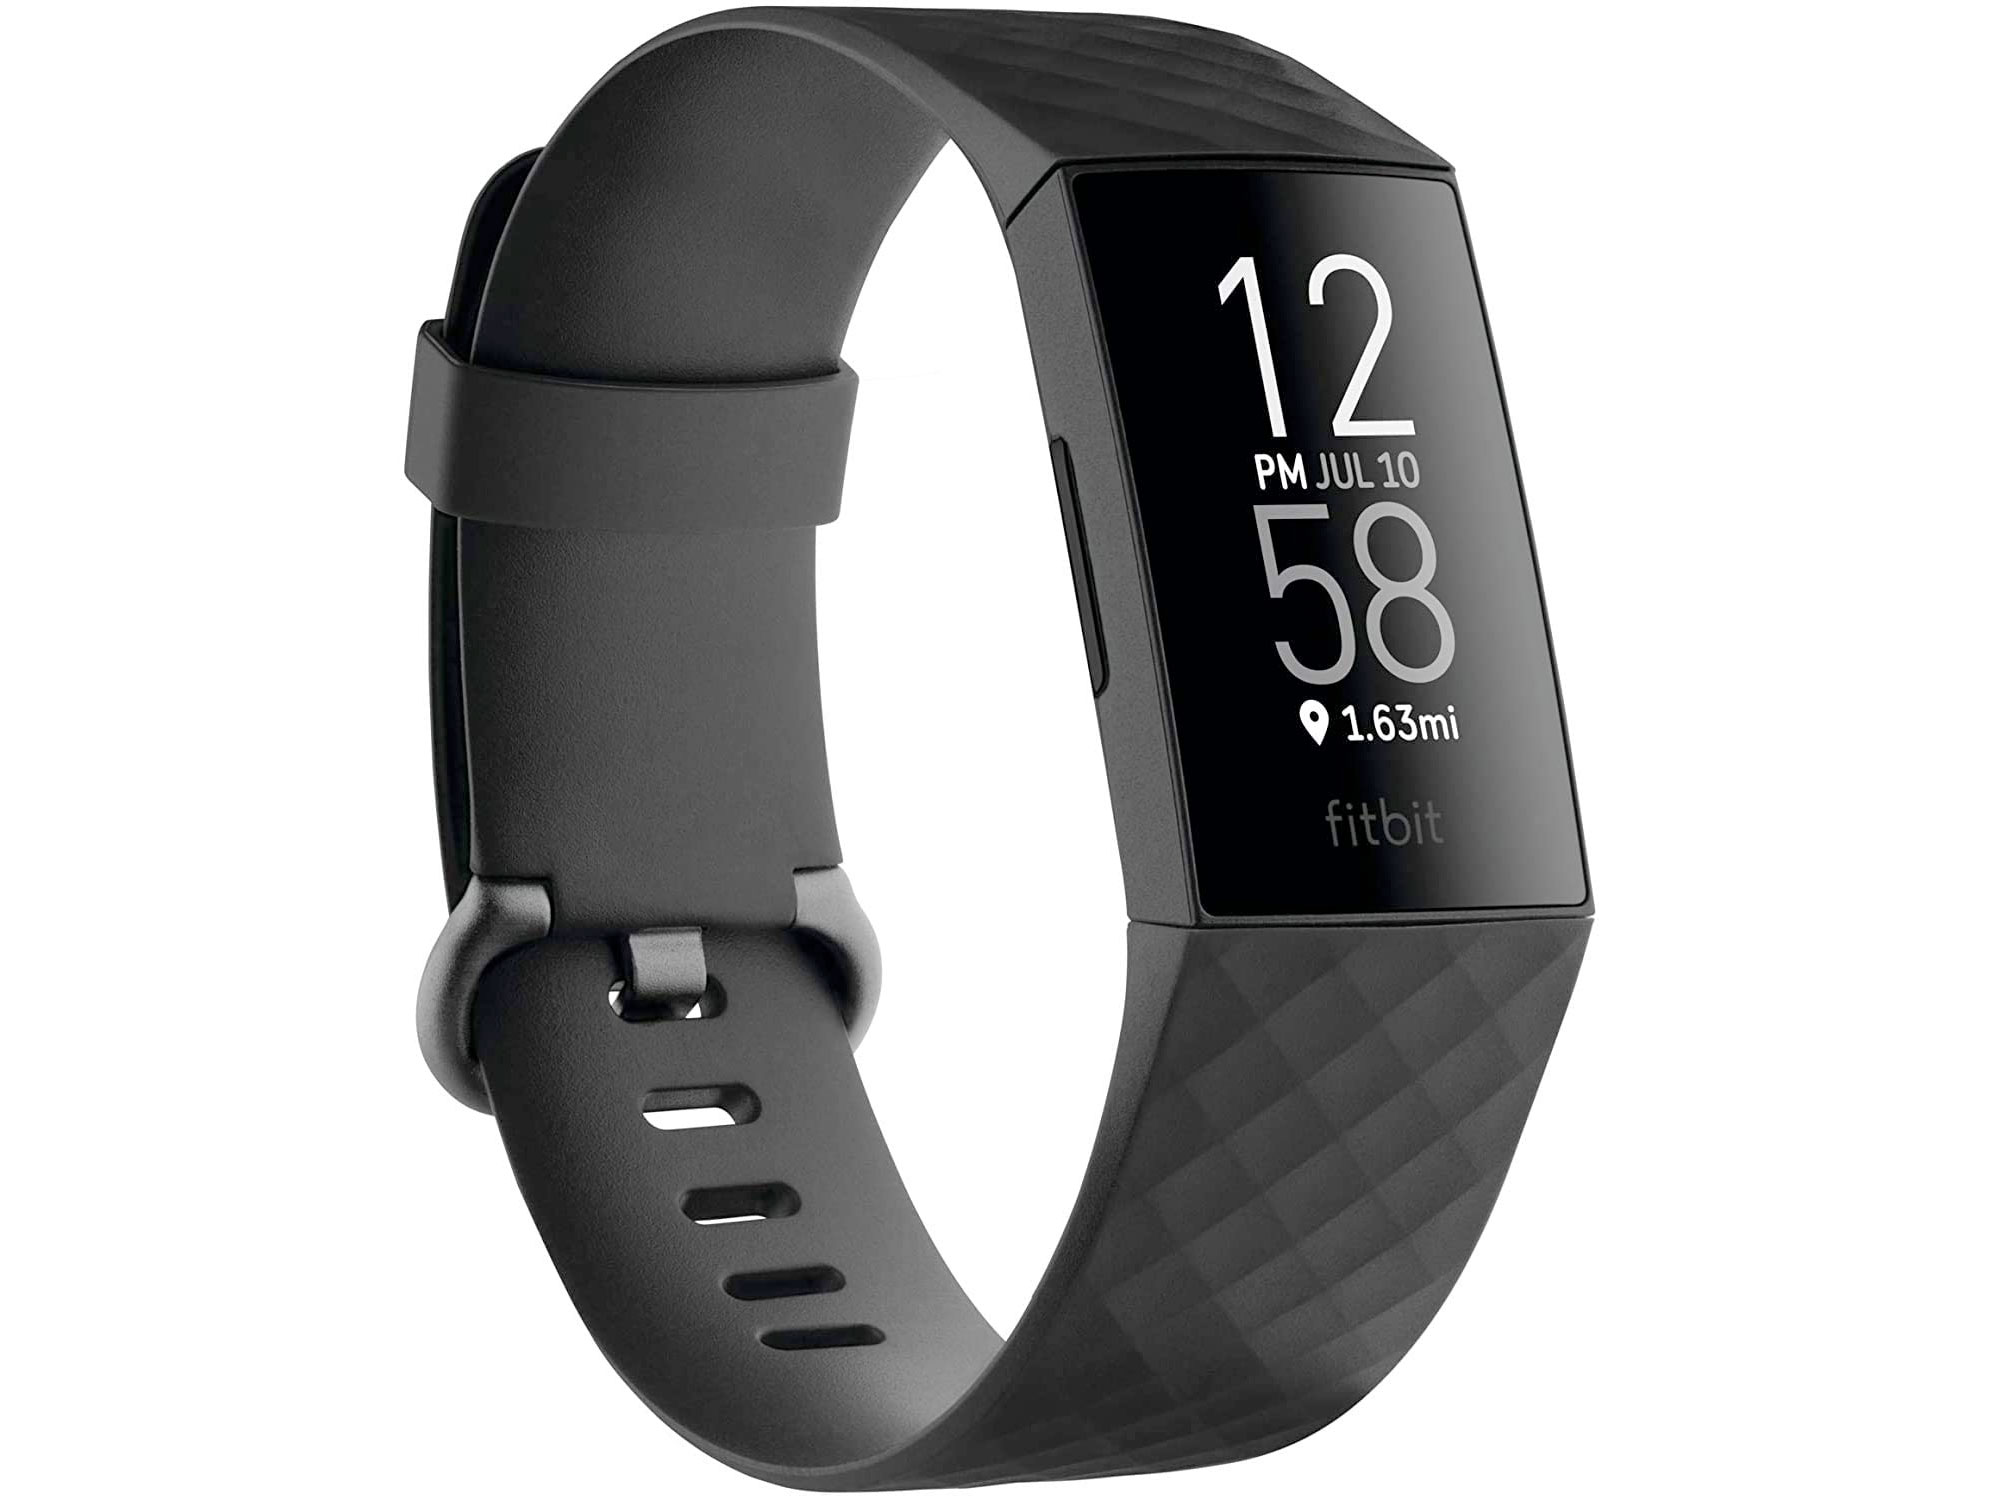 Amazon：Fitbit Charge 4 fitness and Activity Tracker只賣$129.95